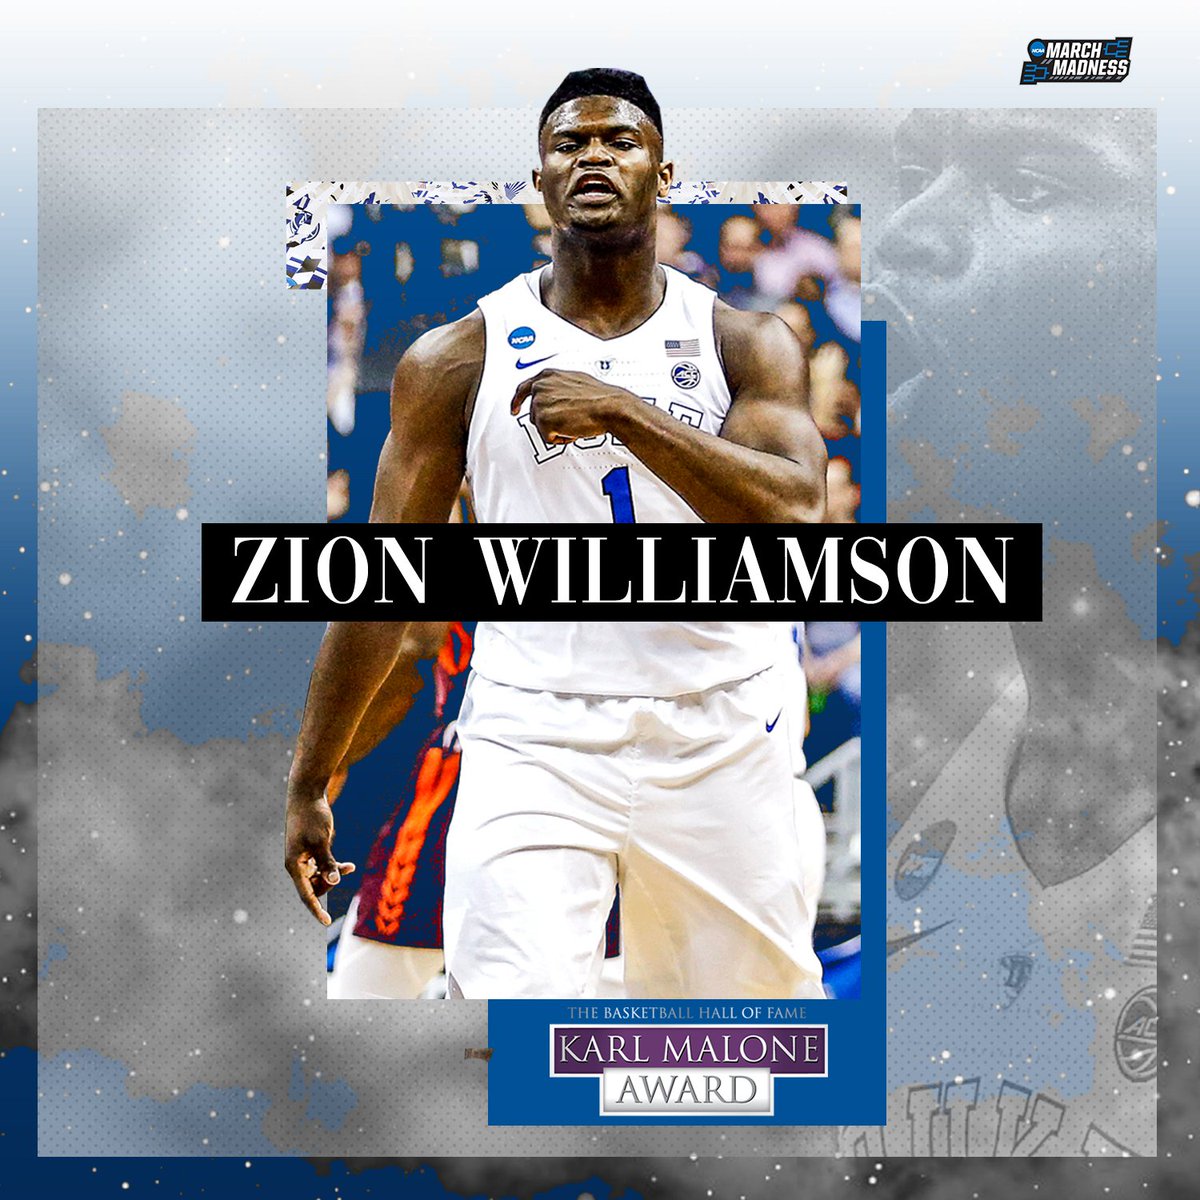 Best power forward in the country? That title belongs to Zion Williamson!

Congrats to @ZionW32 on earning the #MaloneAward! 🏆